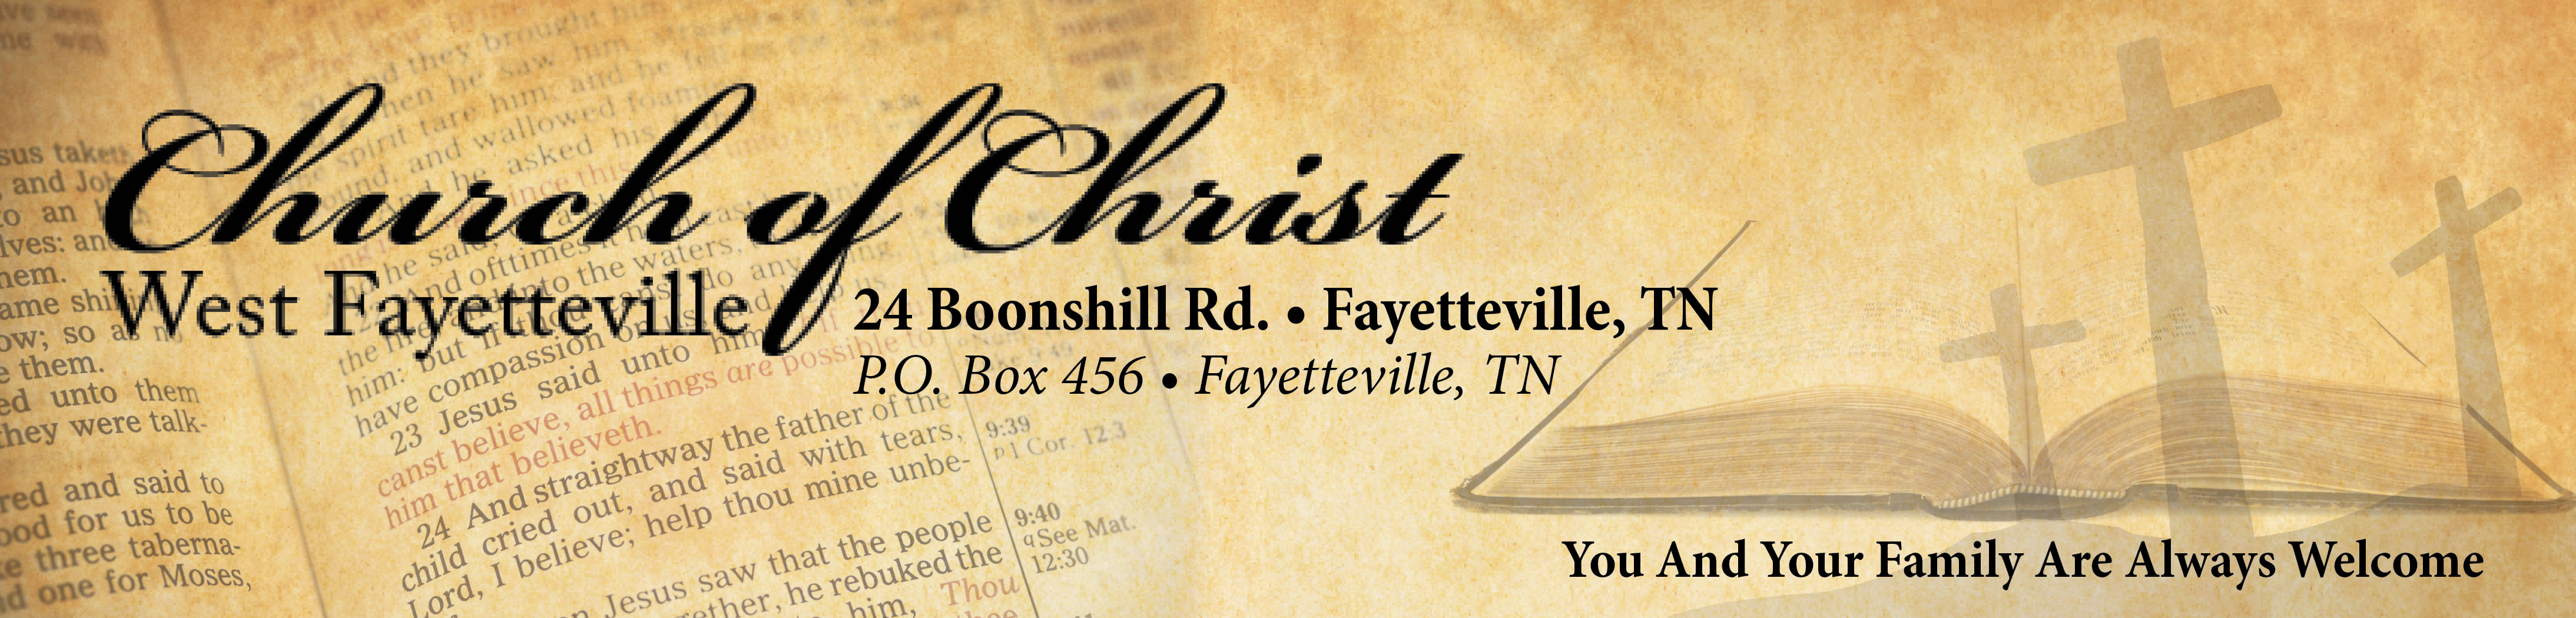 West Fayetteville Church of Christ